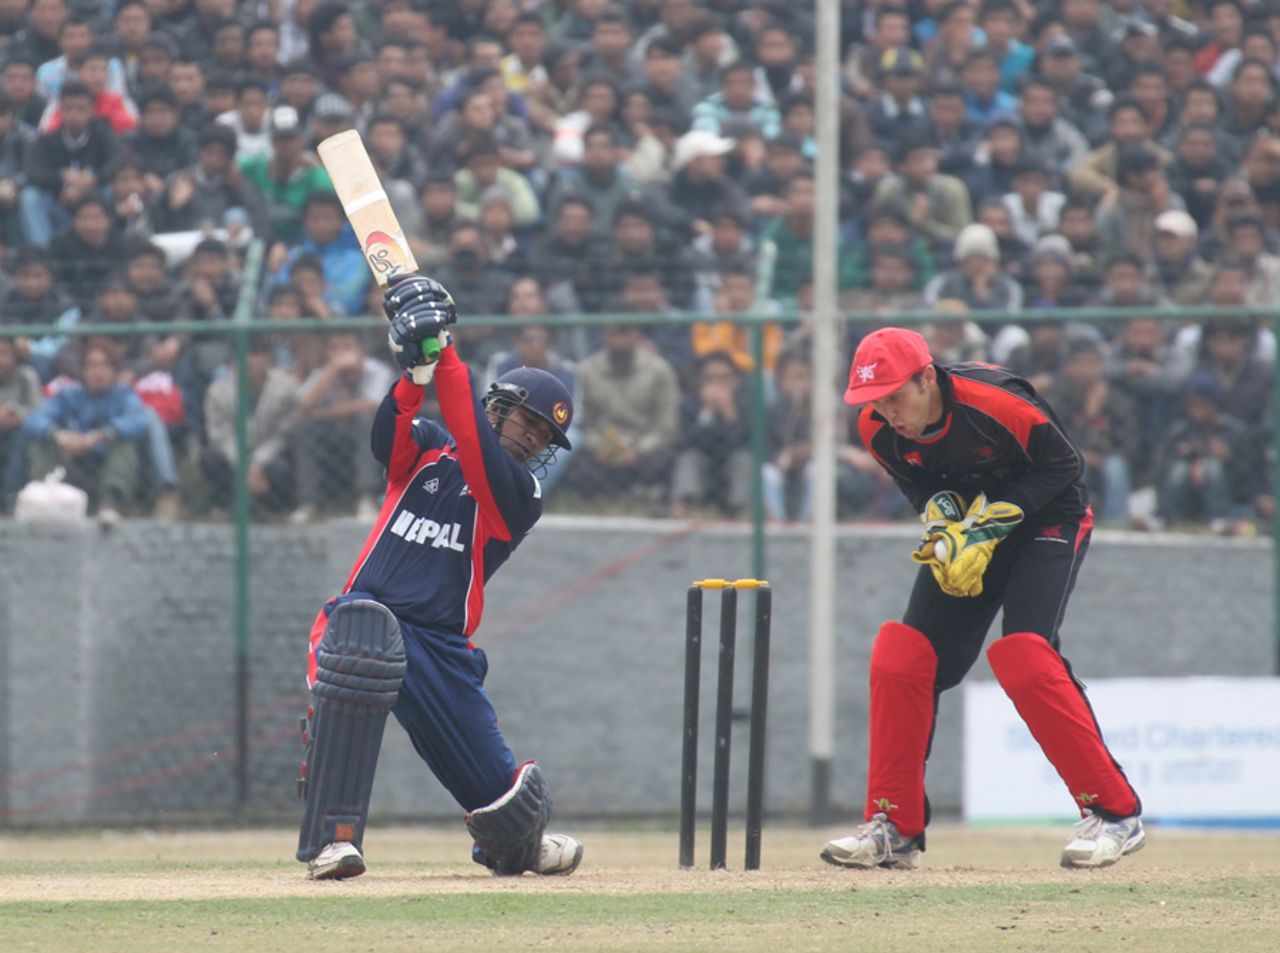 Mark Ferguson makes a clean take as Nepal's Mahboob Alam plays and misses during the ACC Twenty20 Cup 2011 match played at Tribhuvan University in Kathmandu on 3rd December 2011